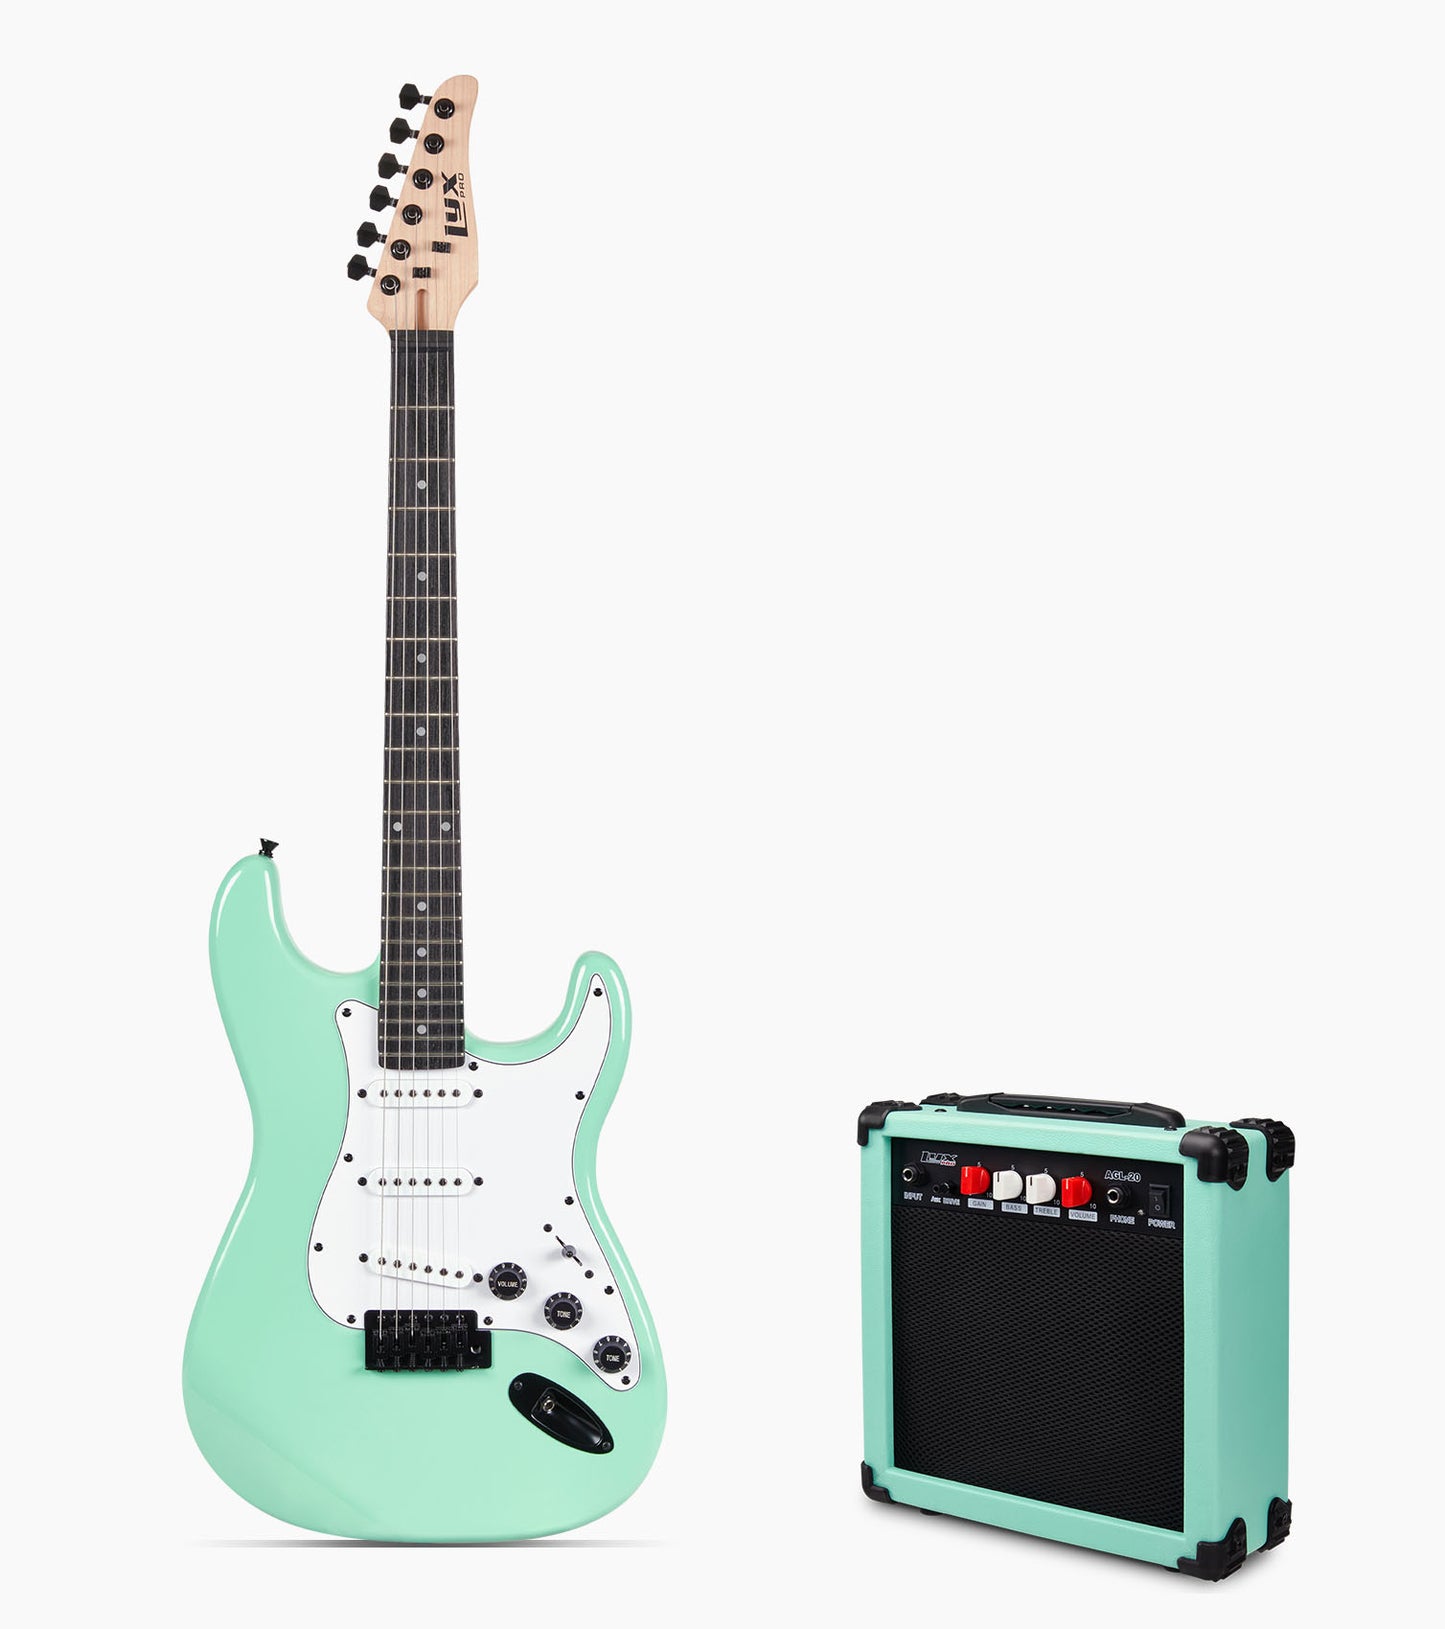 39” Green beginner electric guitar with amp